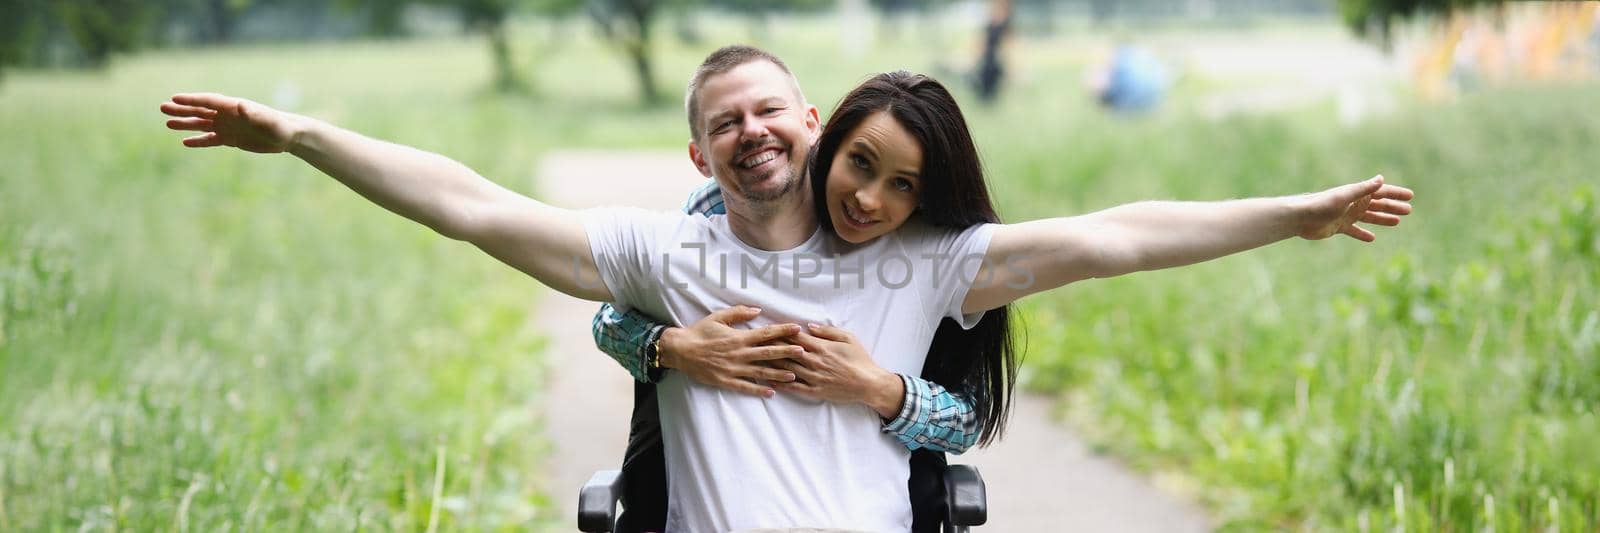 Portrait of disabled man sitting in wheelchair, wife hugging from behind. Happy and smiling couple on weekend walk in park. Happiness, appreciate life, accident, love concept